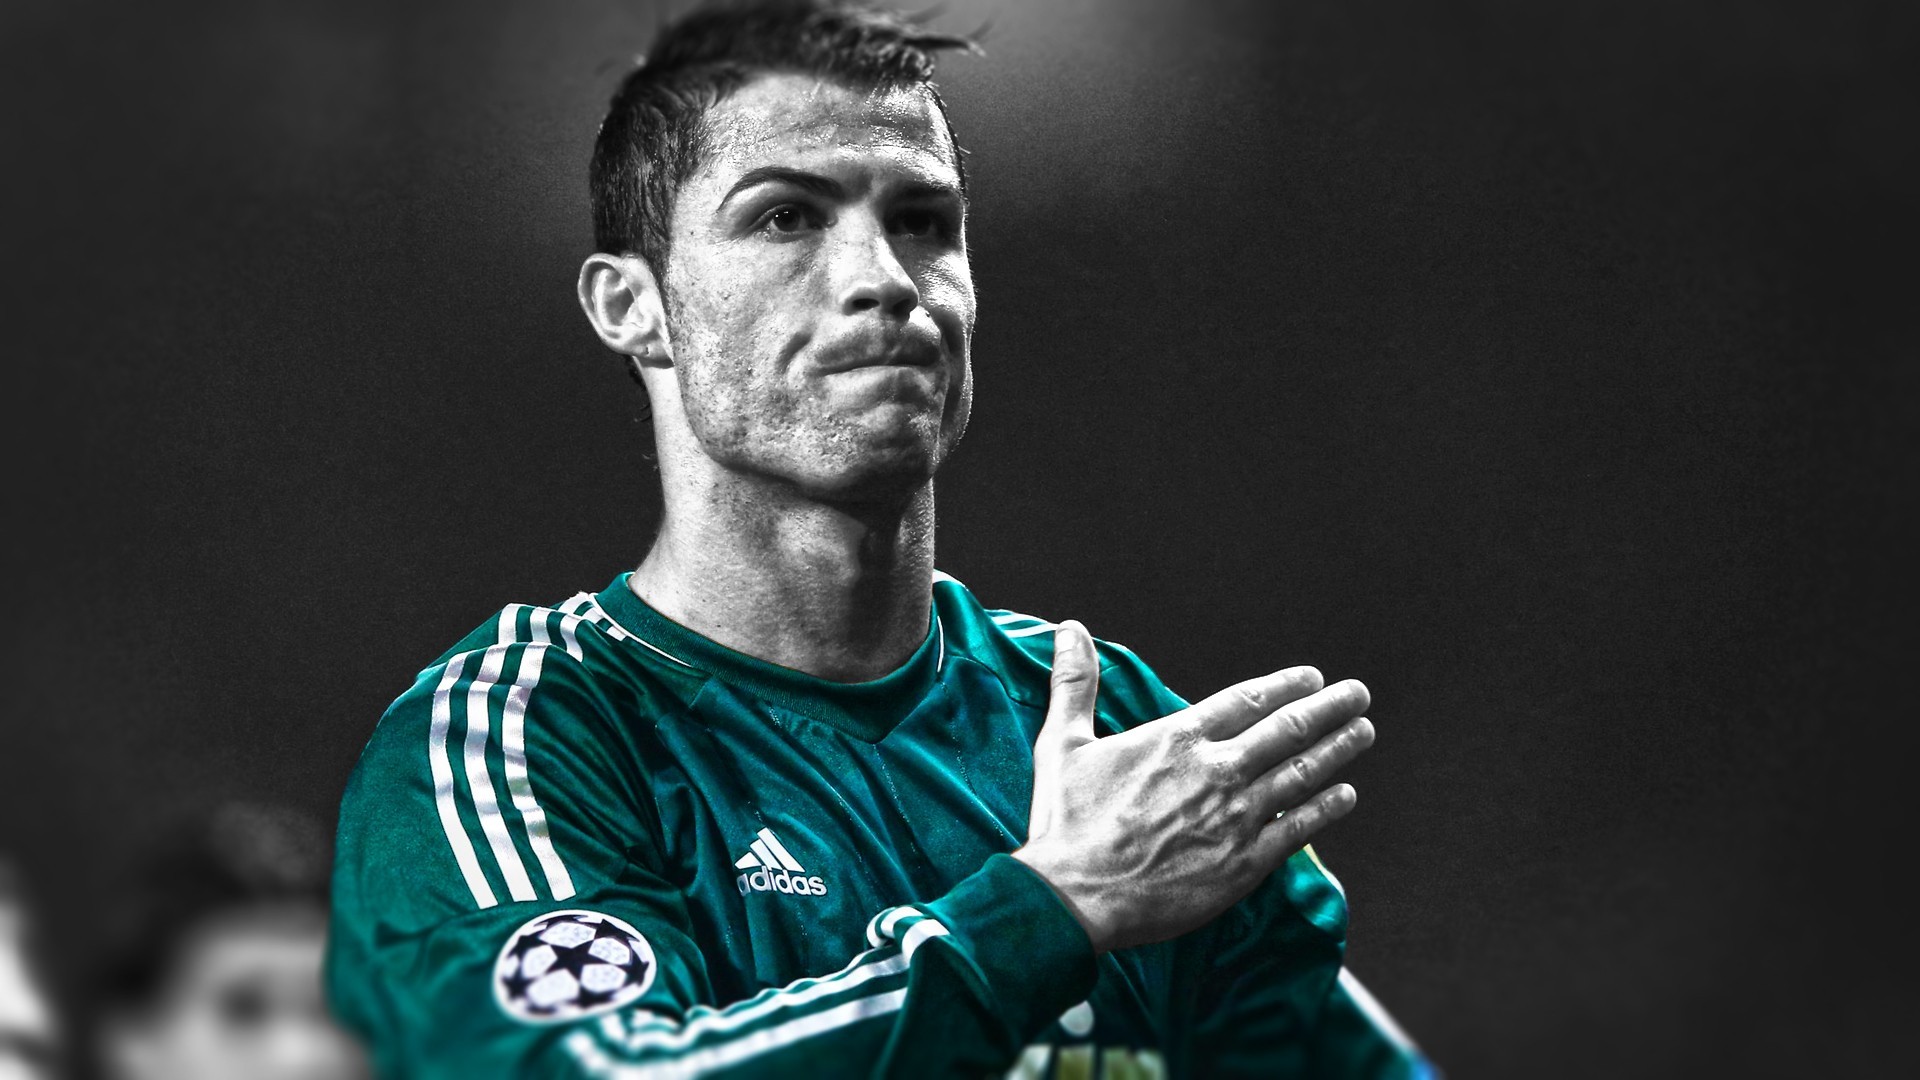 People 1920x1080 Cristiano Ronaldo Real Madrid selective coloring sport men soccer